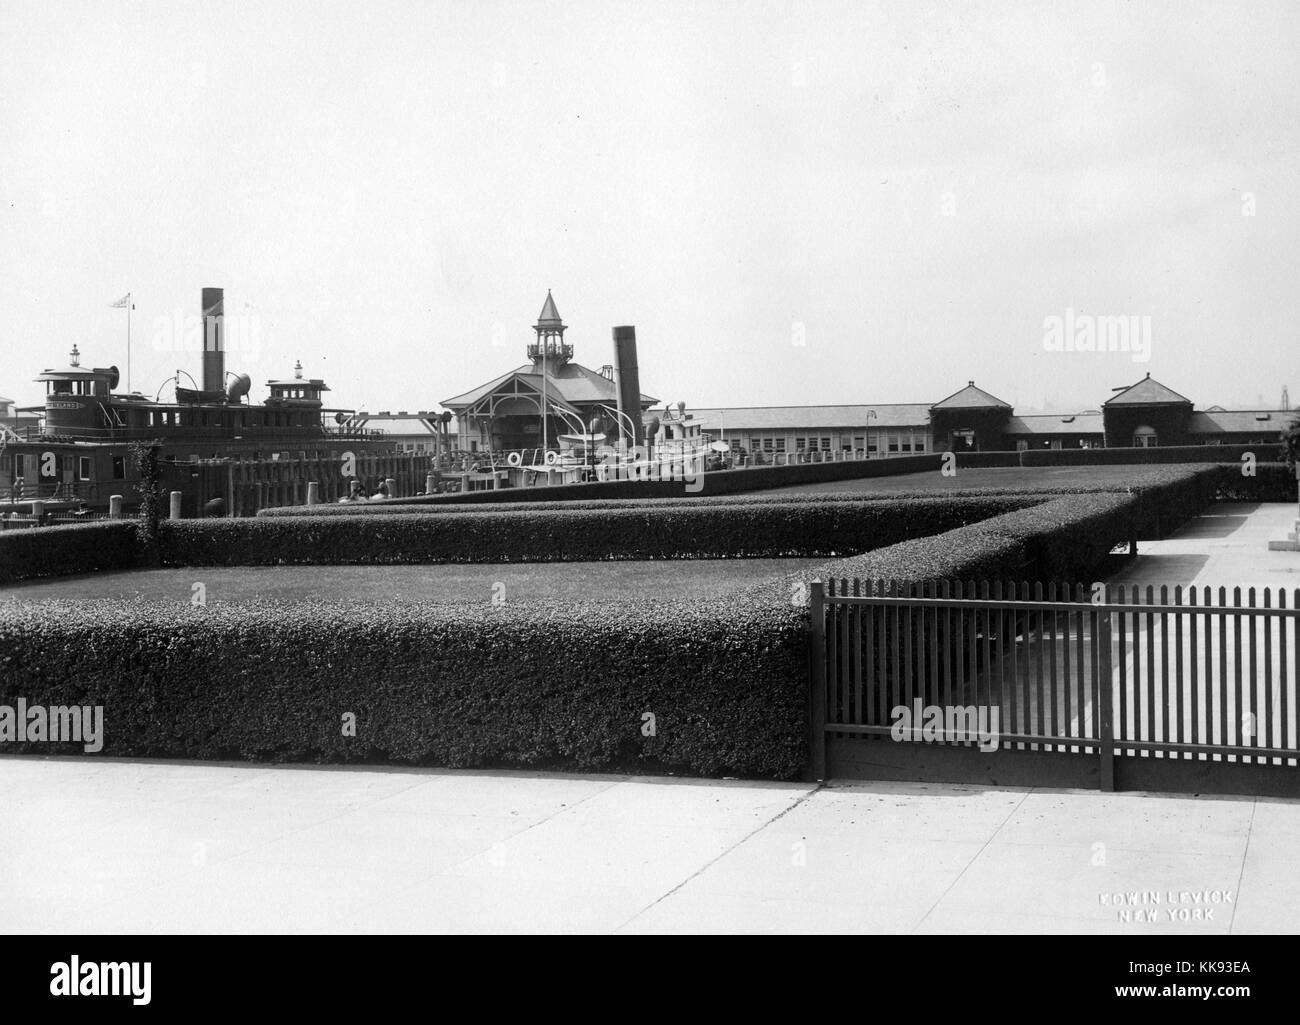 A photograph of the pier on Ellis Island, the ferry docked on the left side of the image was operated by the Department of Commerce and Labor, they oversaw the United States Immigration Services between 1903 and 1913, buildings that make up a small portion of the structures on Ellis Island can be seen in the background, grassy lawns walled off by scrubs are surrounded by large walkways, Ellis Island opened in 1892 and it was closed in 1954 after processing over 12 million immigrants, New York, 1907. From the New York Public Library. Stock Photo